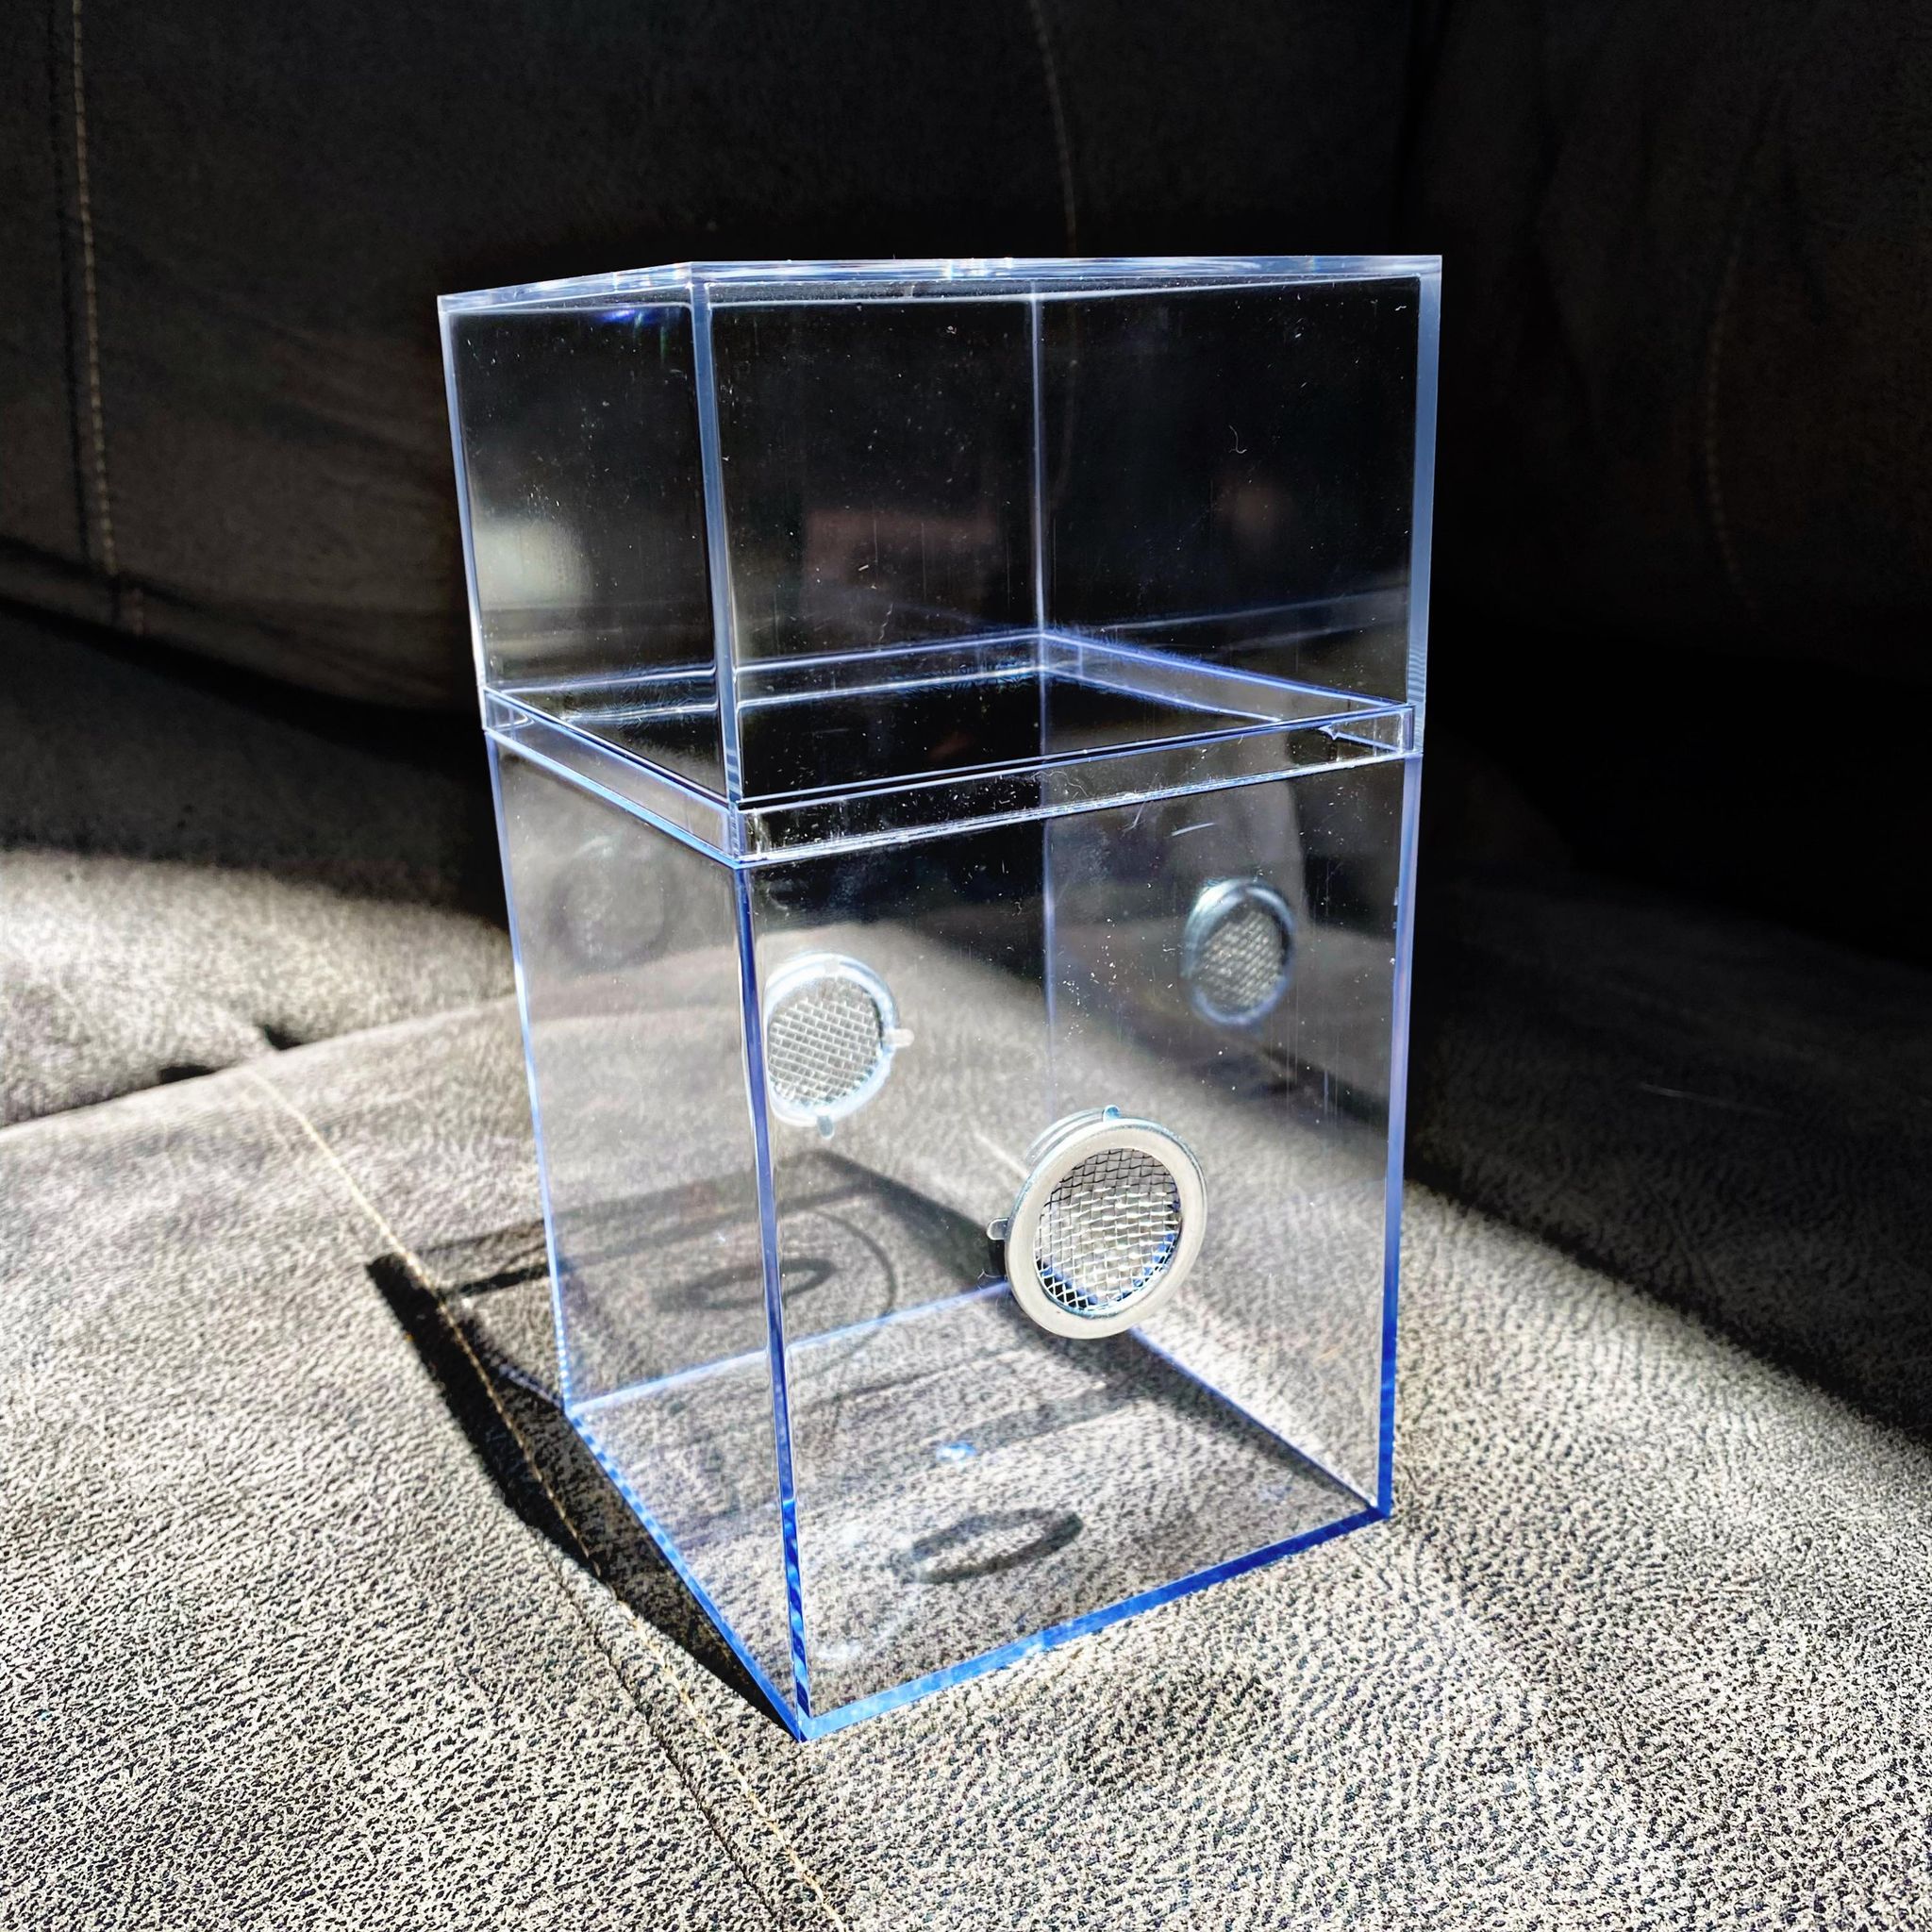 Jumping Spider Starter Kit acrylic enclosure with accessories